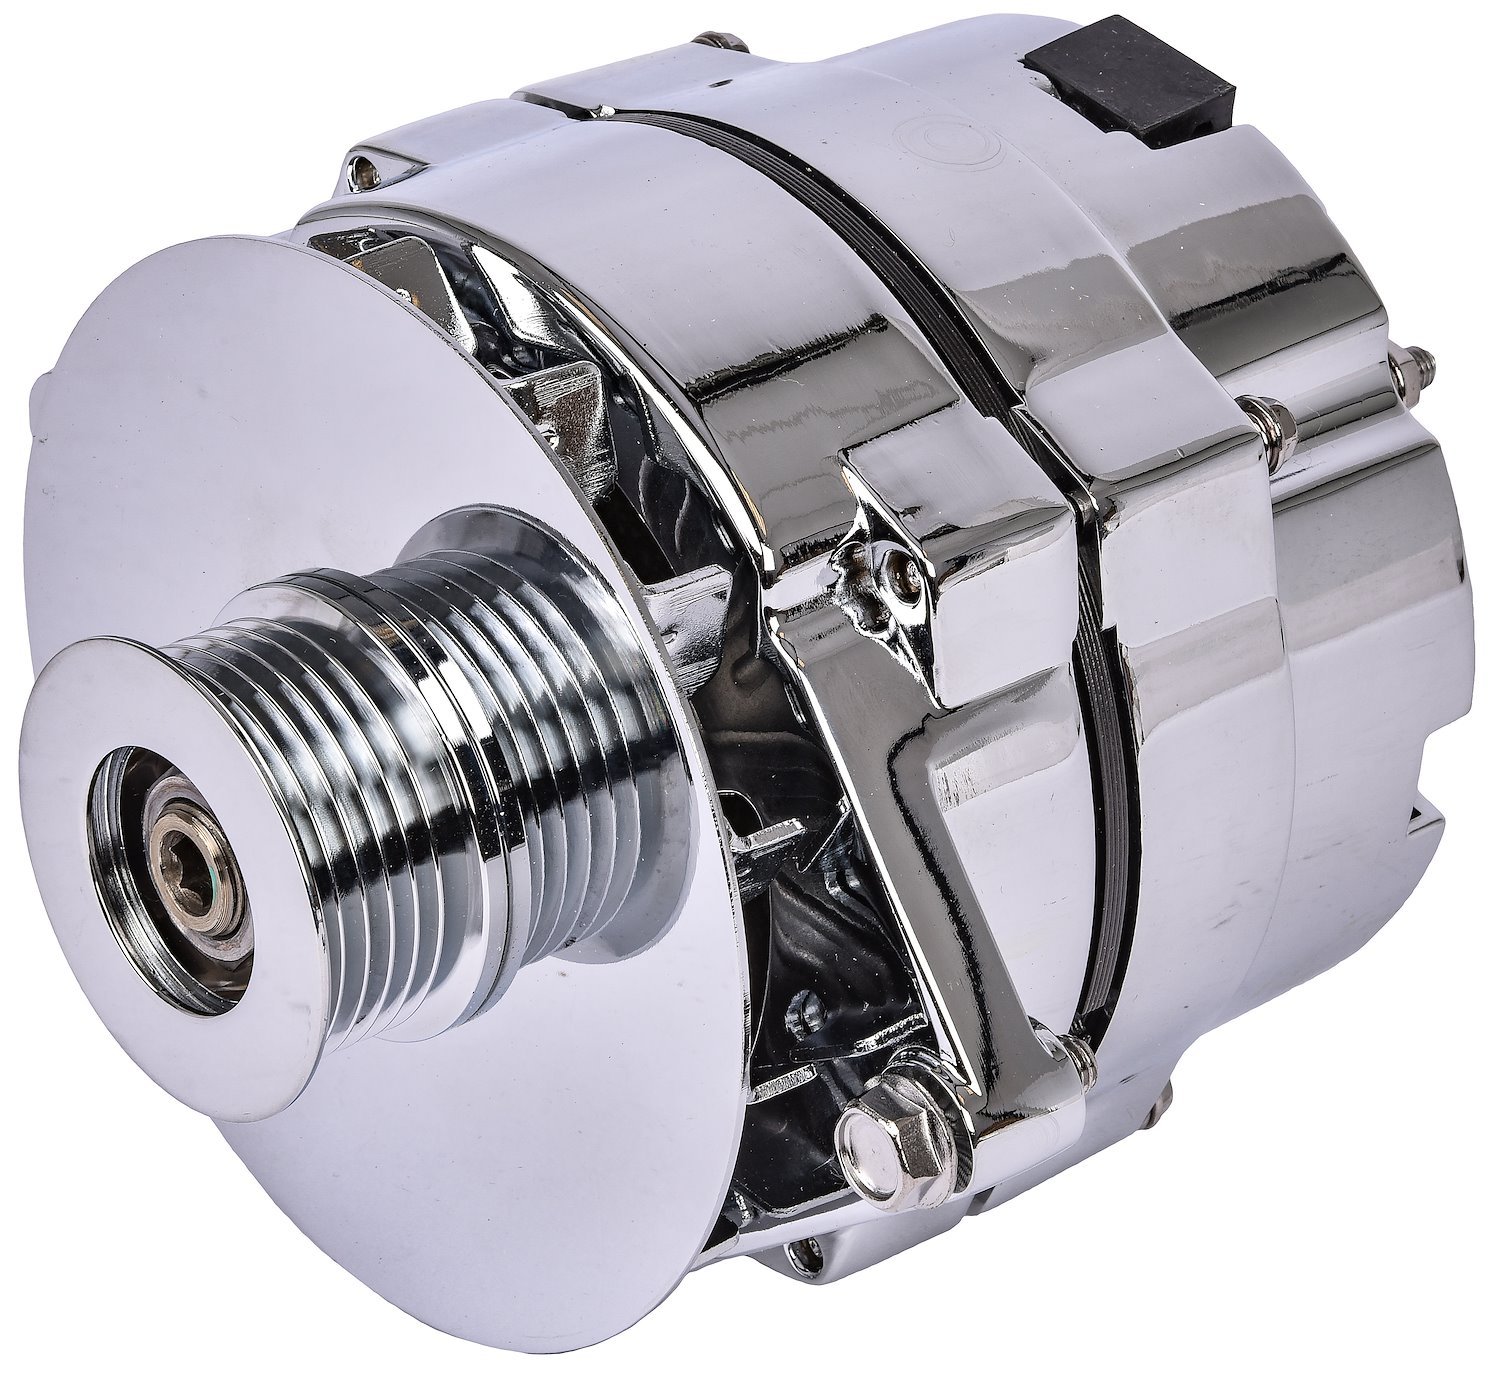 1-Wire GM Alternator 100 AMP Output Serpentine Pulley [Chrome Plated Finish]